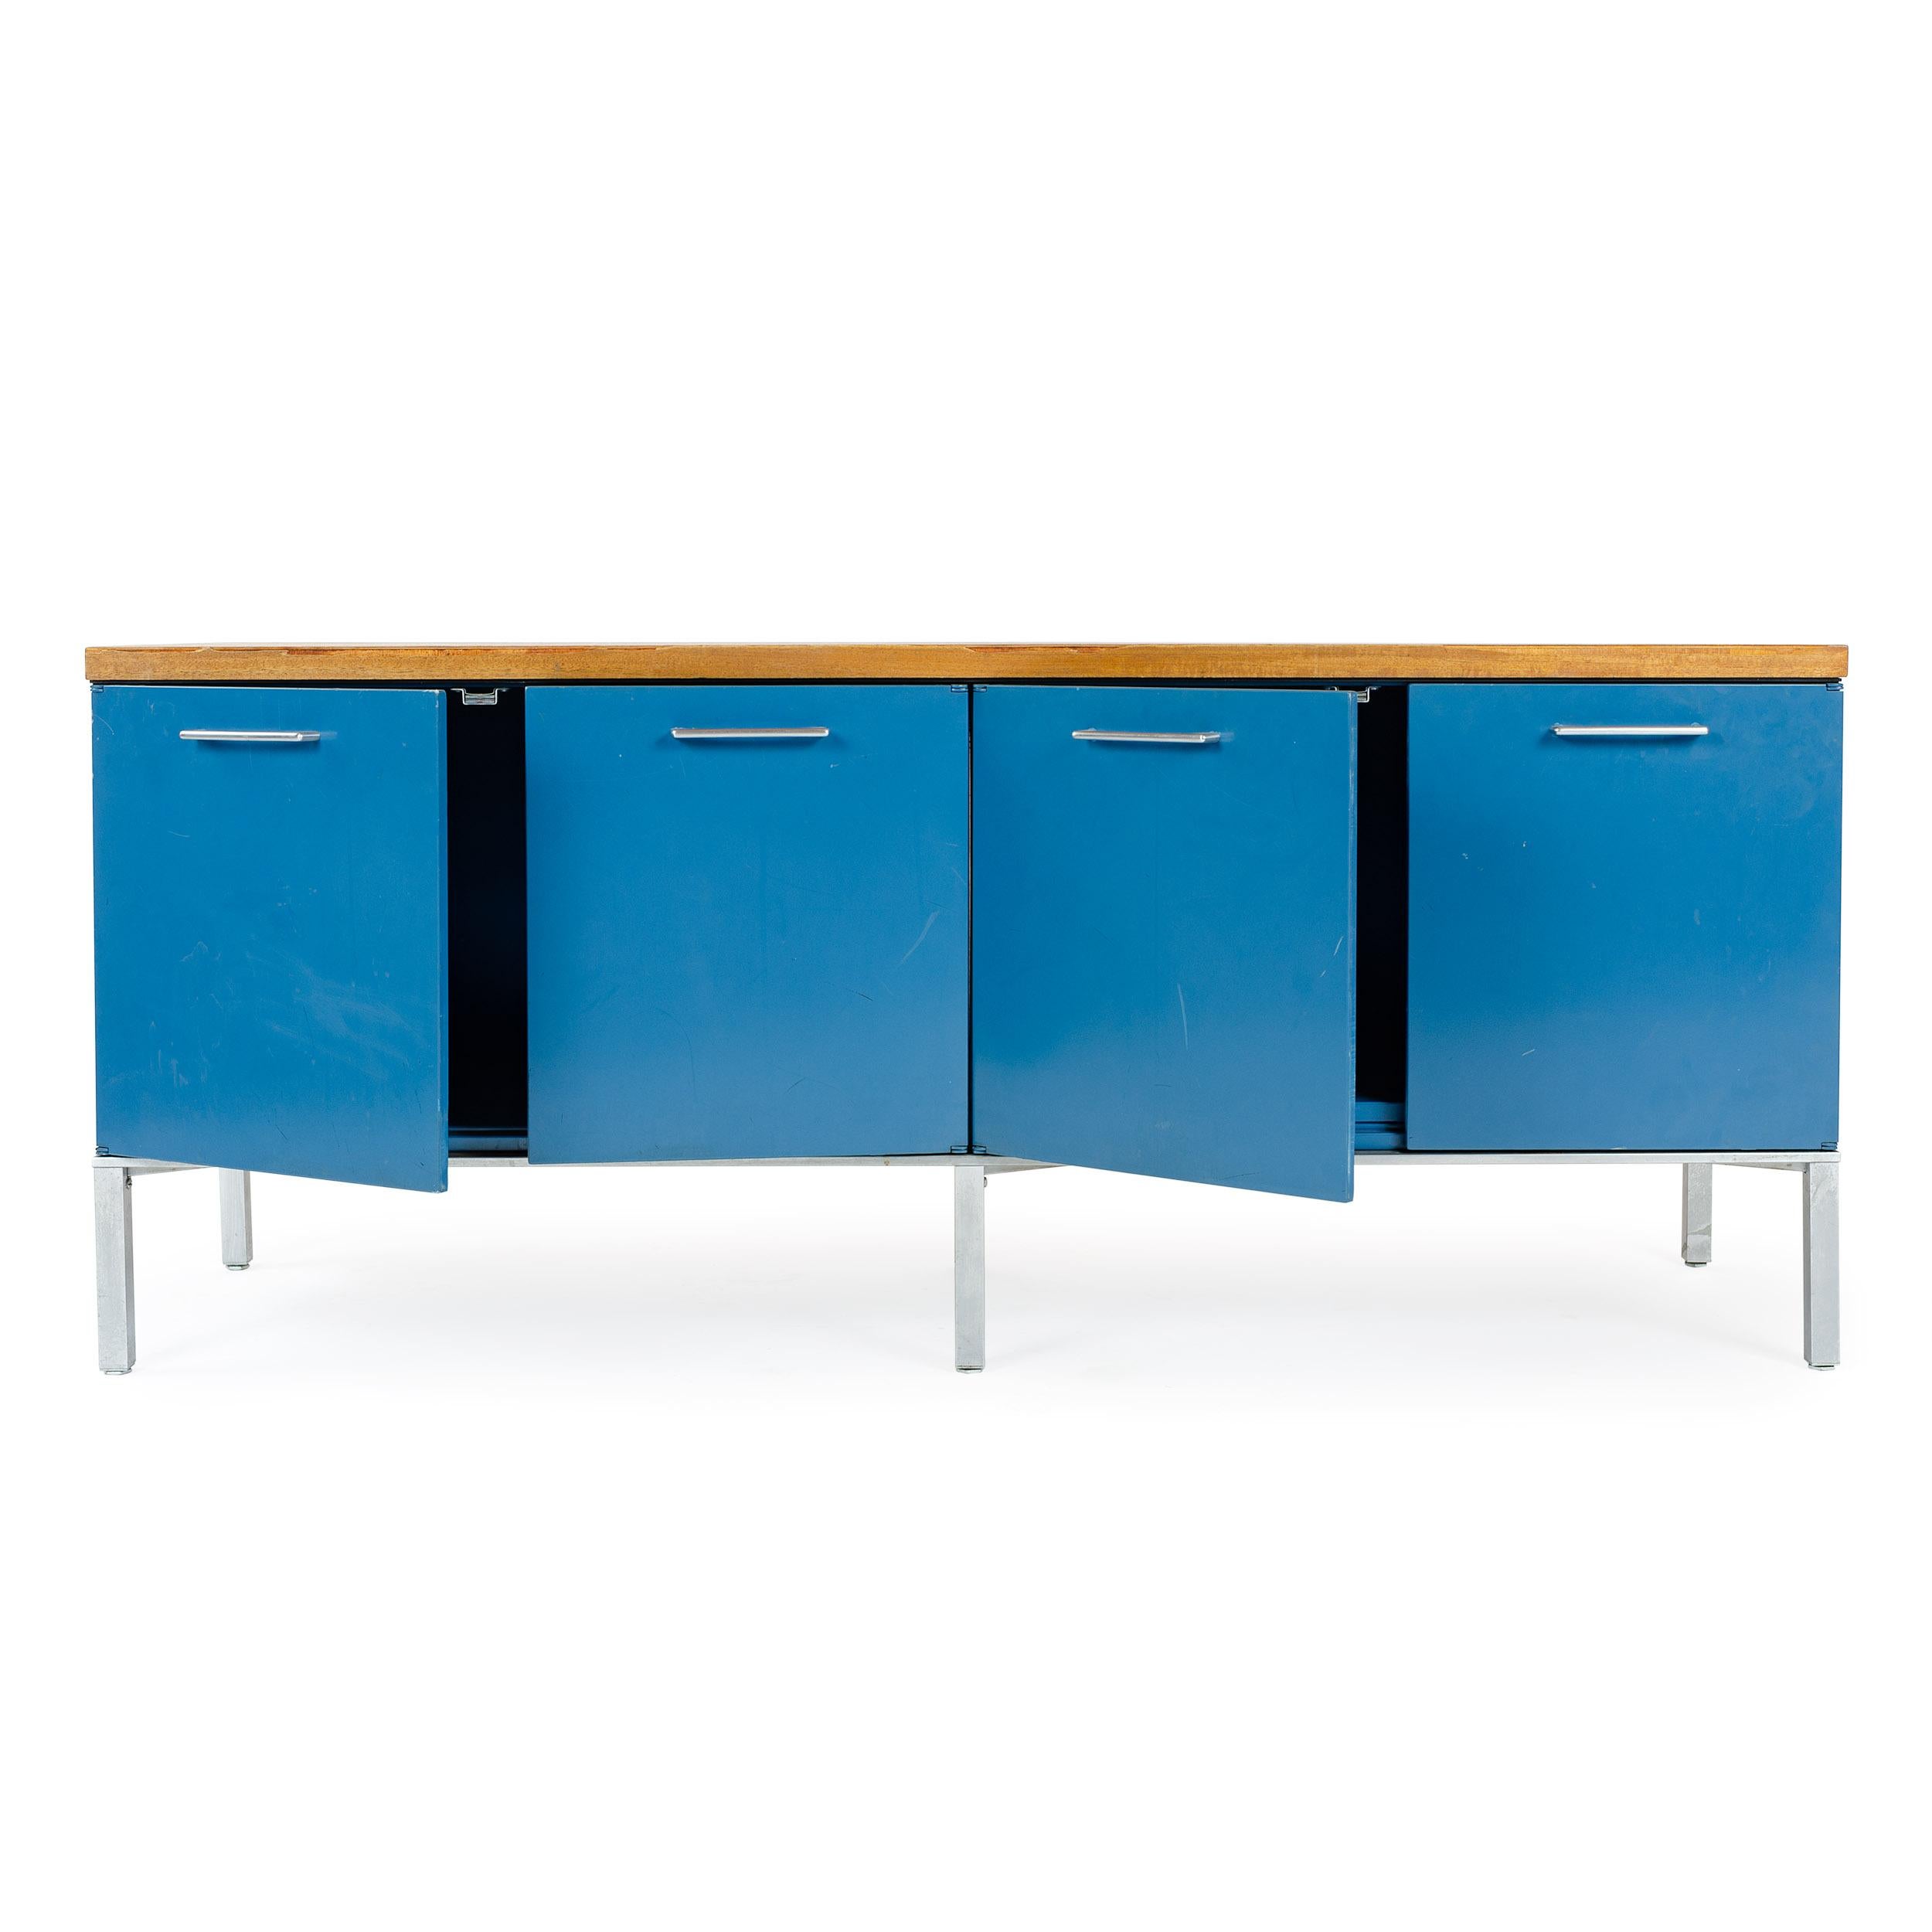 An original brilliant blue four door steel credenza with walnut veneered top, square chrome legs, and accenting bright chrome door pulls. Manufactured by GF / General Fireproofing Co. Unsigned.